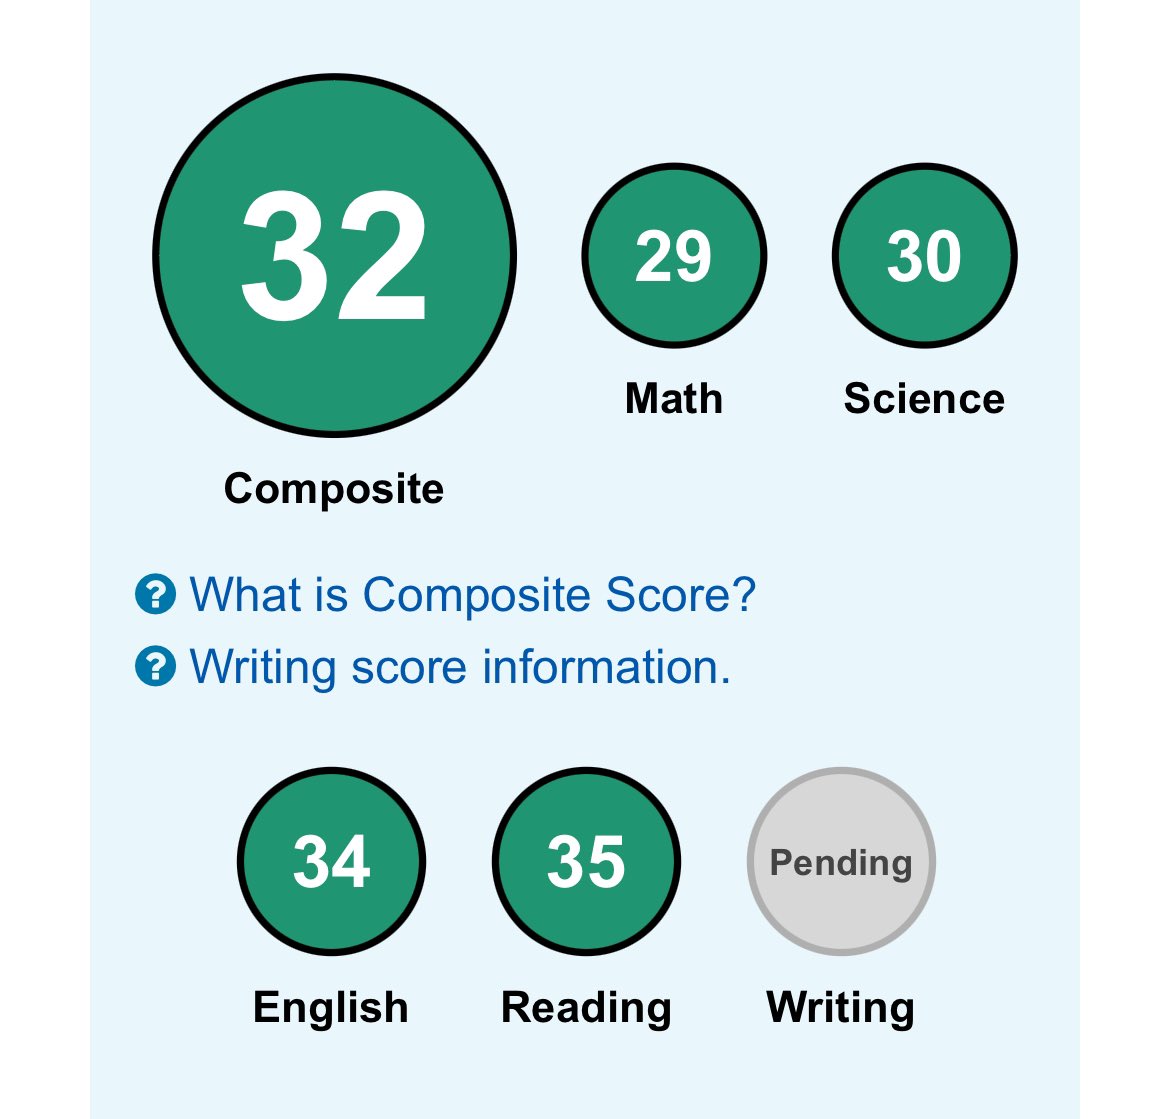 ACT Scores are out!!! Though I am still waiting on writing, I am so proud that all the hours of studying and the work I put in is paying off!!! season! @CoachSullySB @HennesseySftbll @Coach_BarbieD @BryanKHoward1 @HamCollSoftball @RoseHulmanSB @CoachJamesNYU @OcbatbustersL